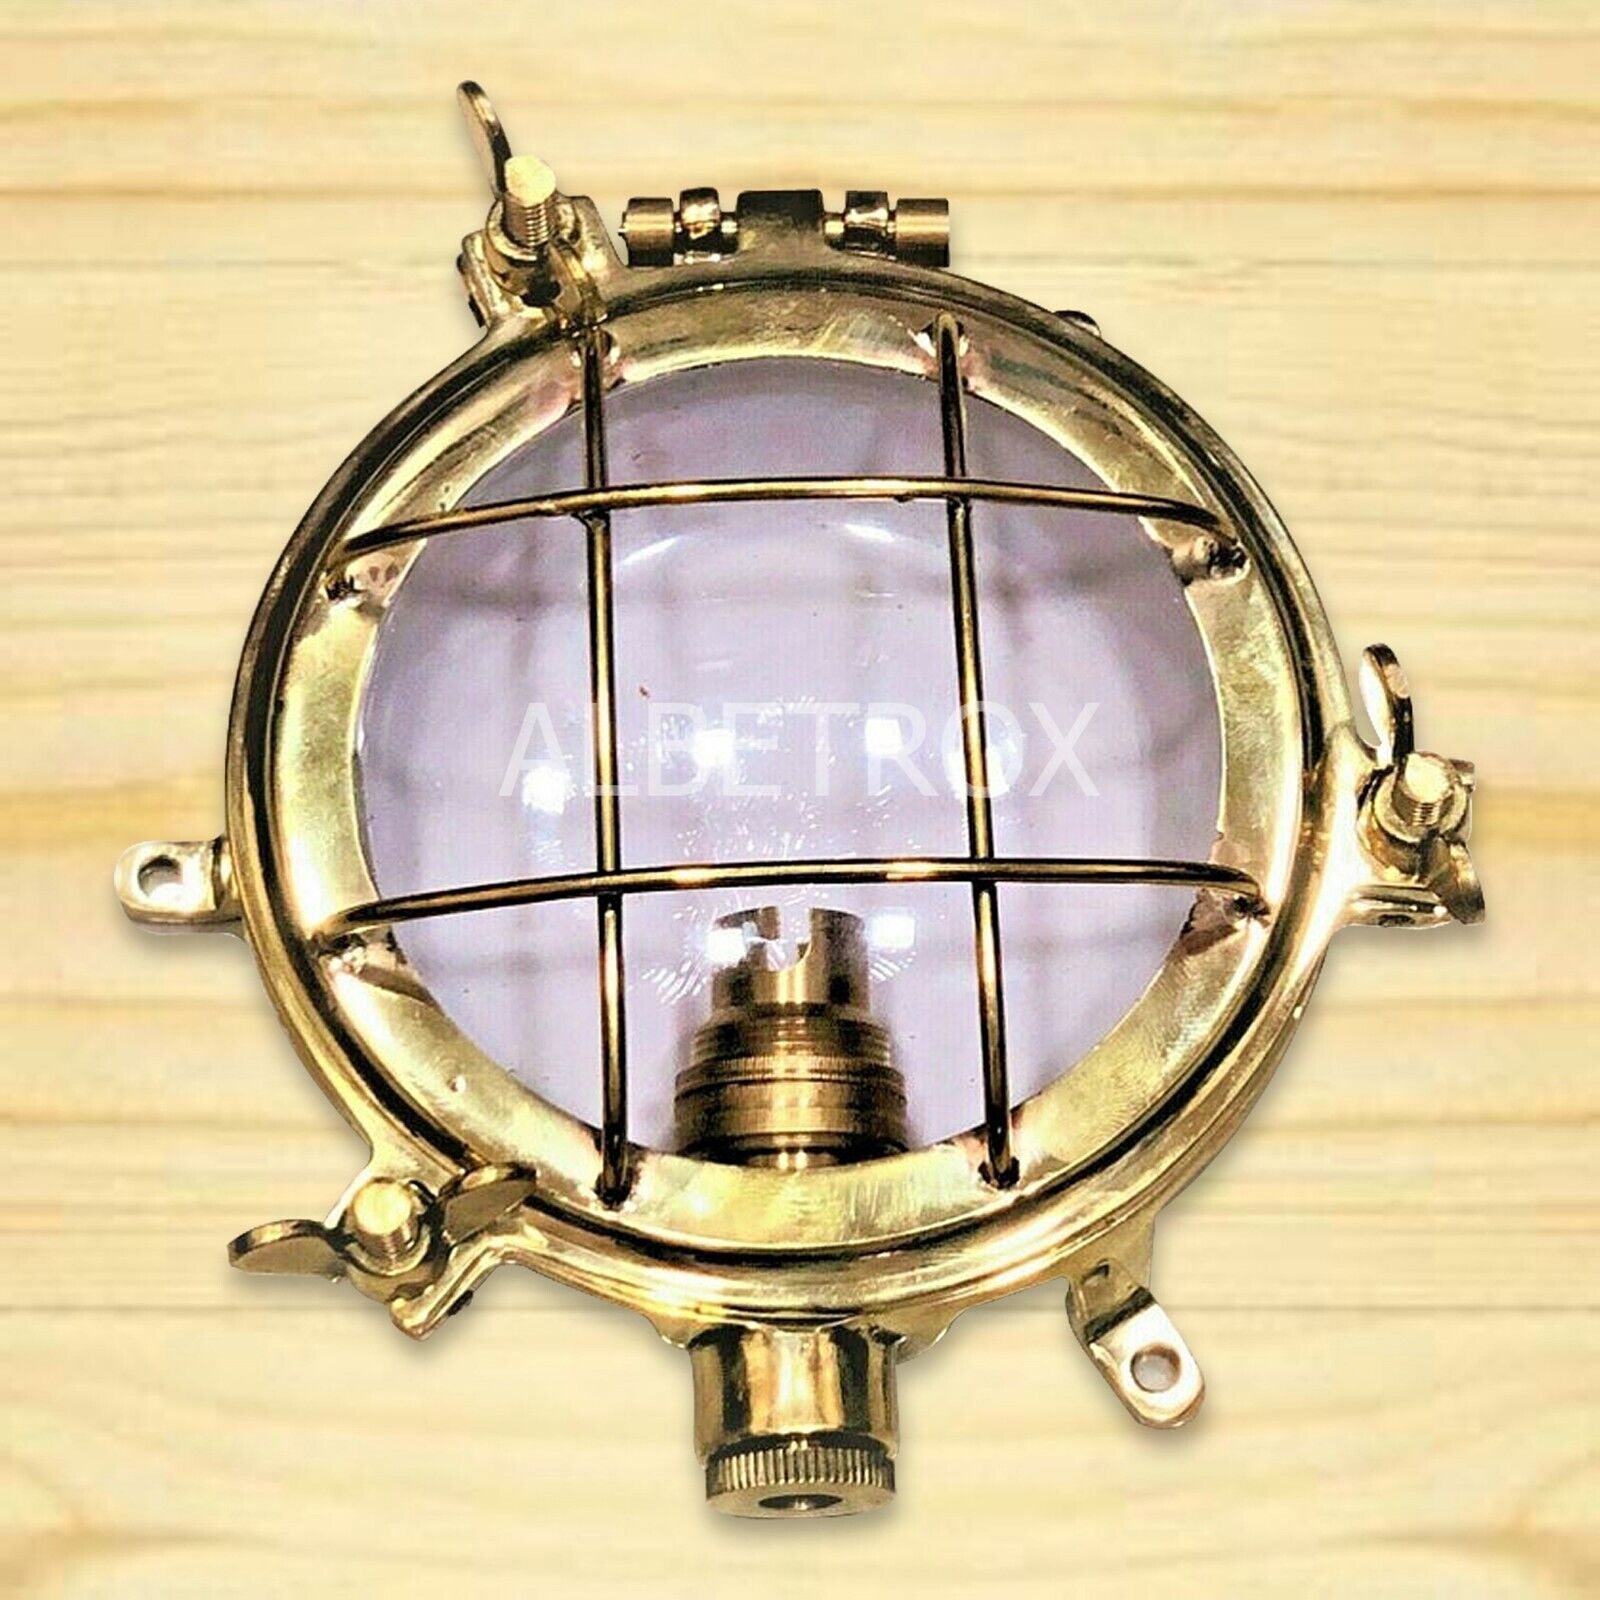 Nautical Marine Small Solid Brass Ship Bulkhead Wall Deck Light for Party Decor